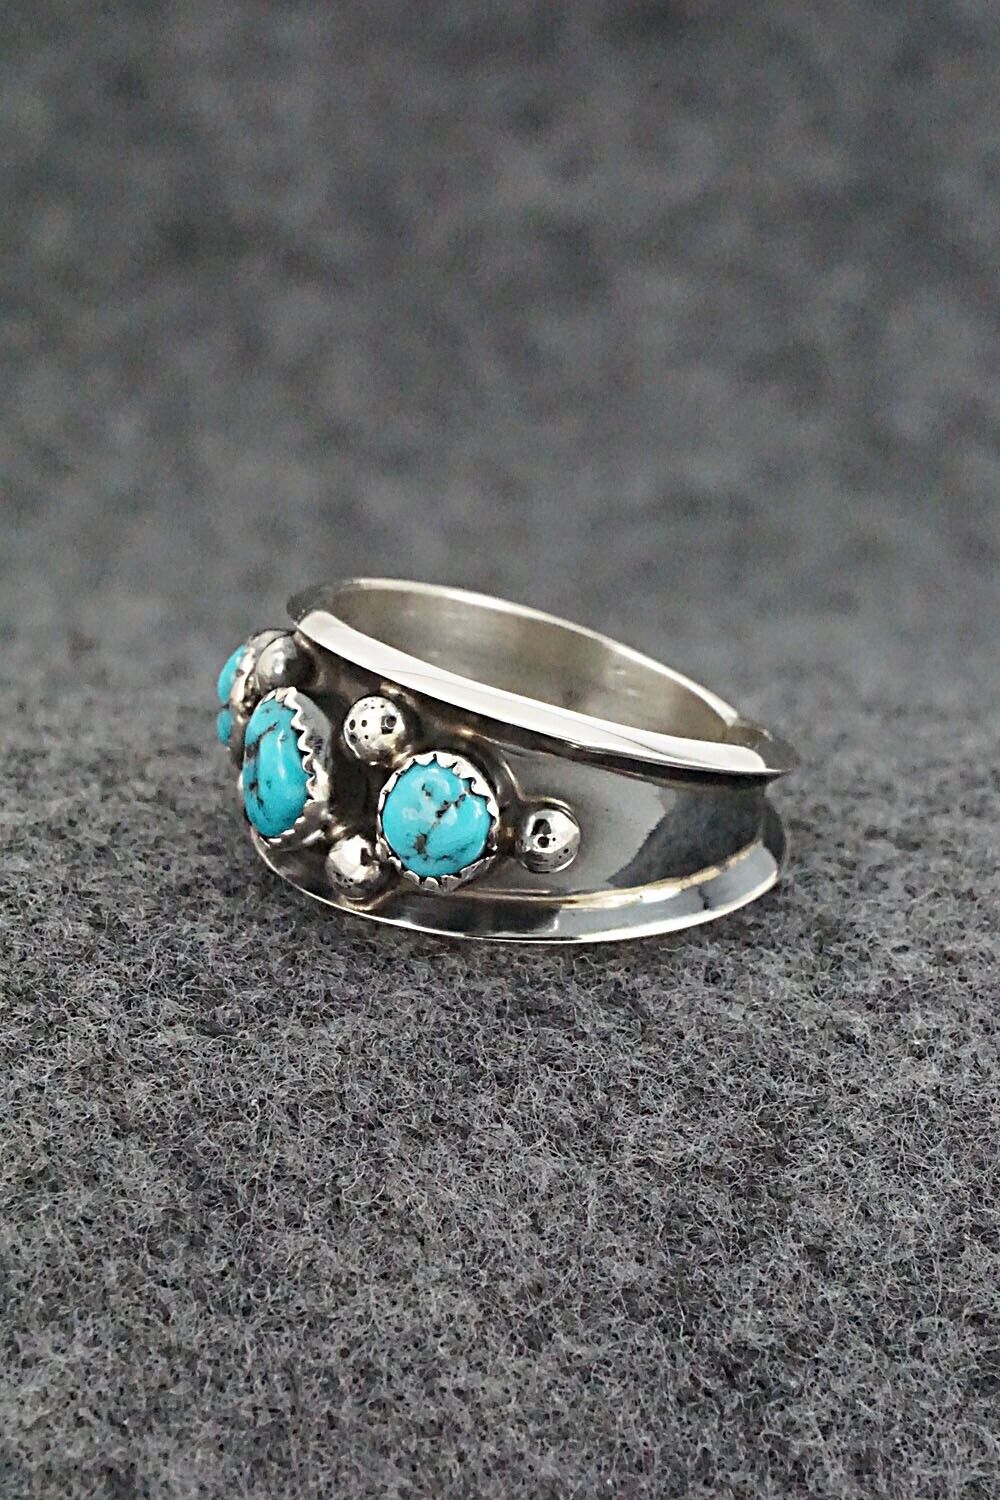 Turquoise & Sterling Silver Ring - Paul Largo - Size 8.5